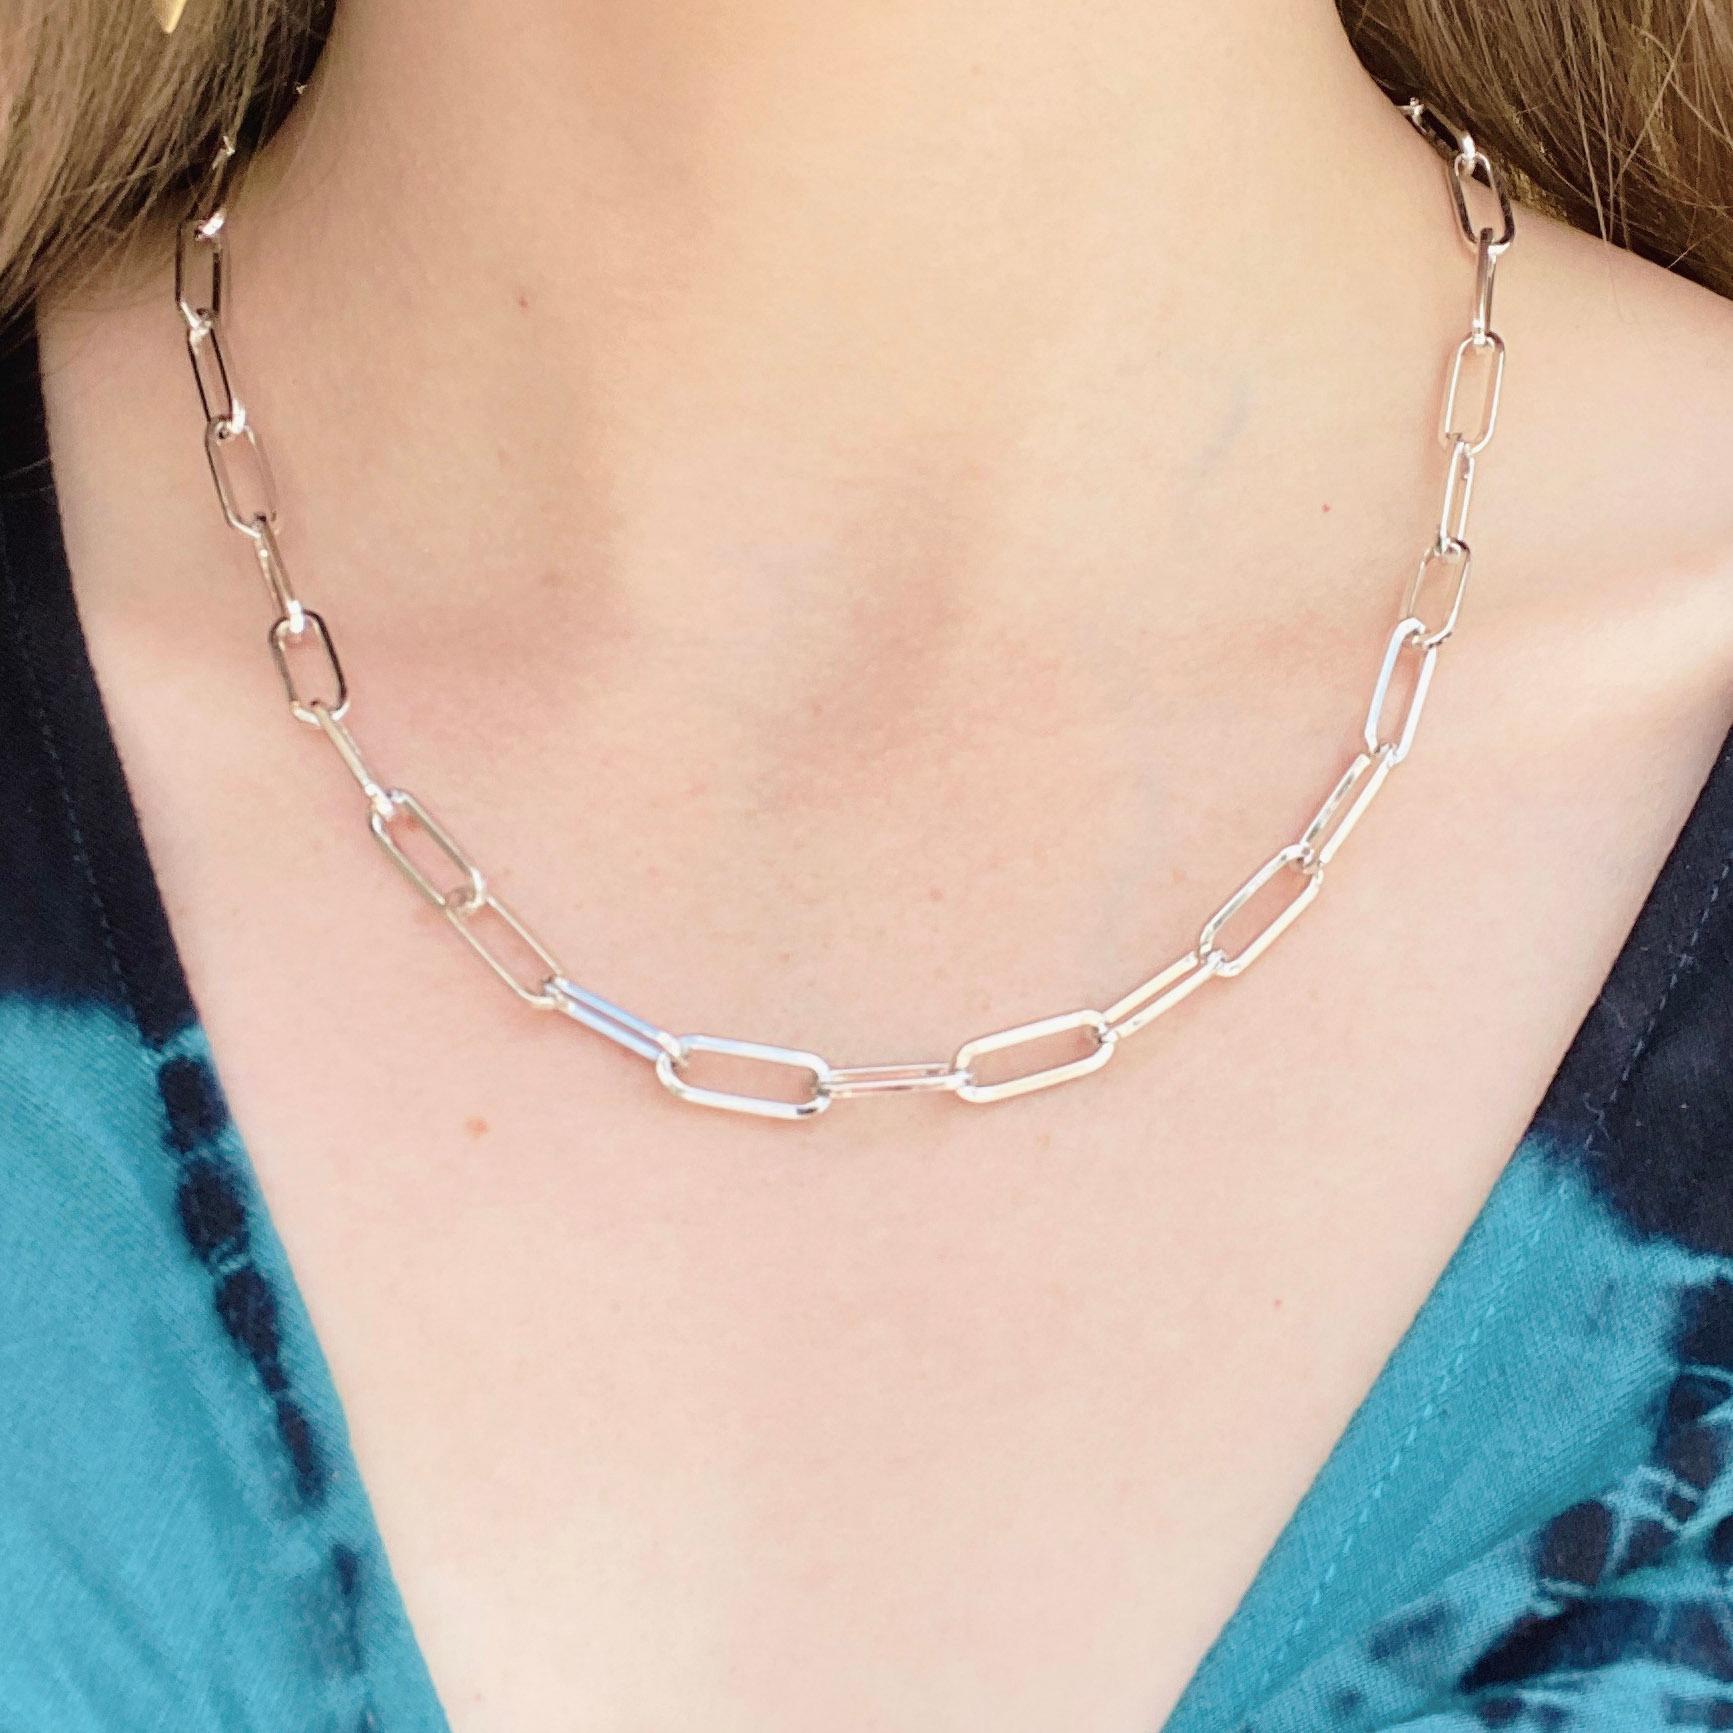 Sterling Silver Paperclip Chain is the 2020 Best Design!  The details are as follows:

Link Width: 6.5mm/.26in
Link Height: 14.93mm/.59in
Chain Length: 18in
Weight: 13.3g

This chain is available in 7.5 inches (6.5mm paperclip bracelet) and 38